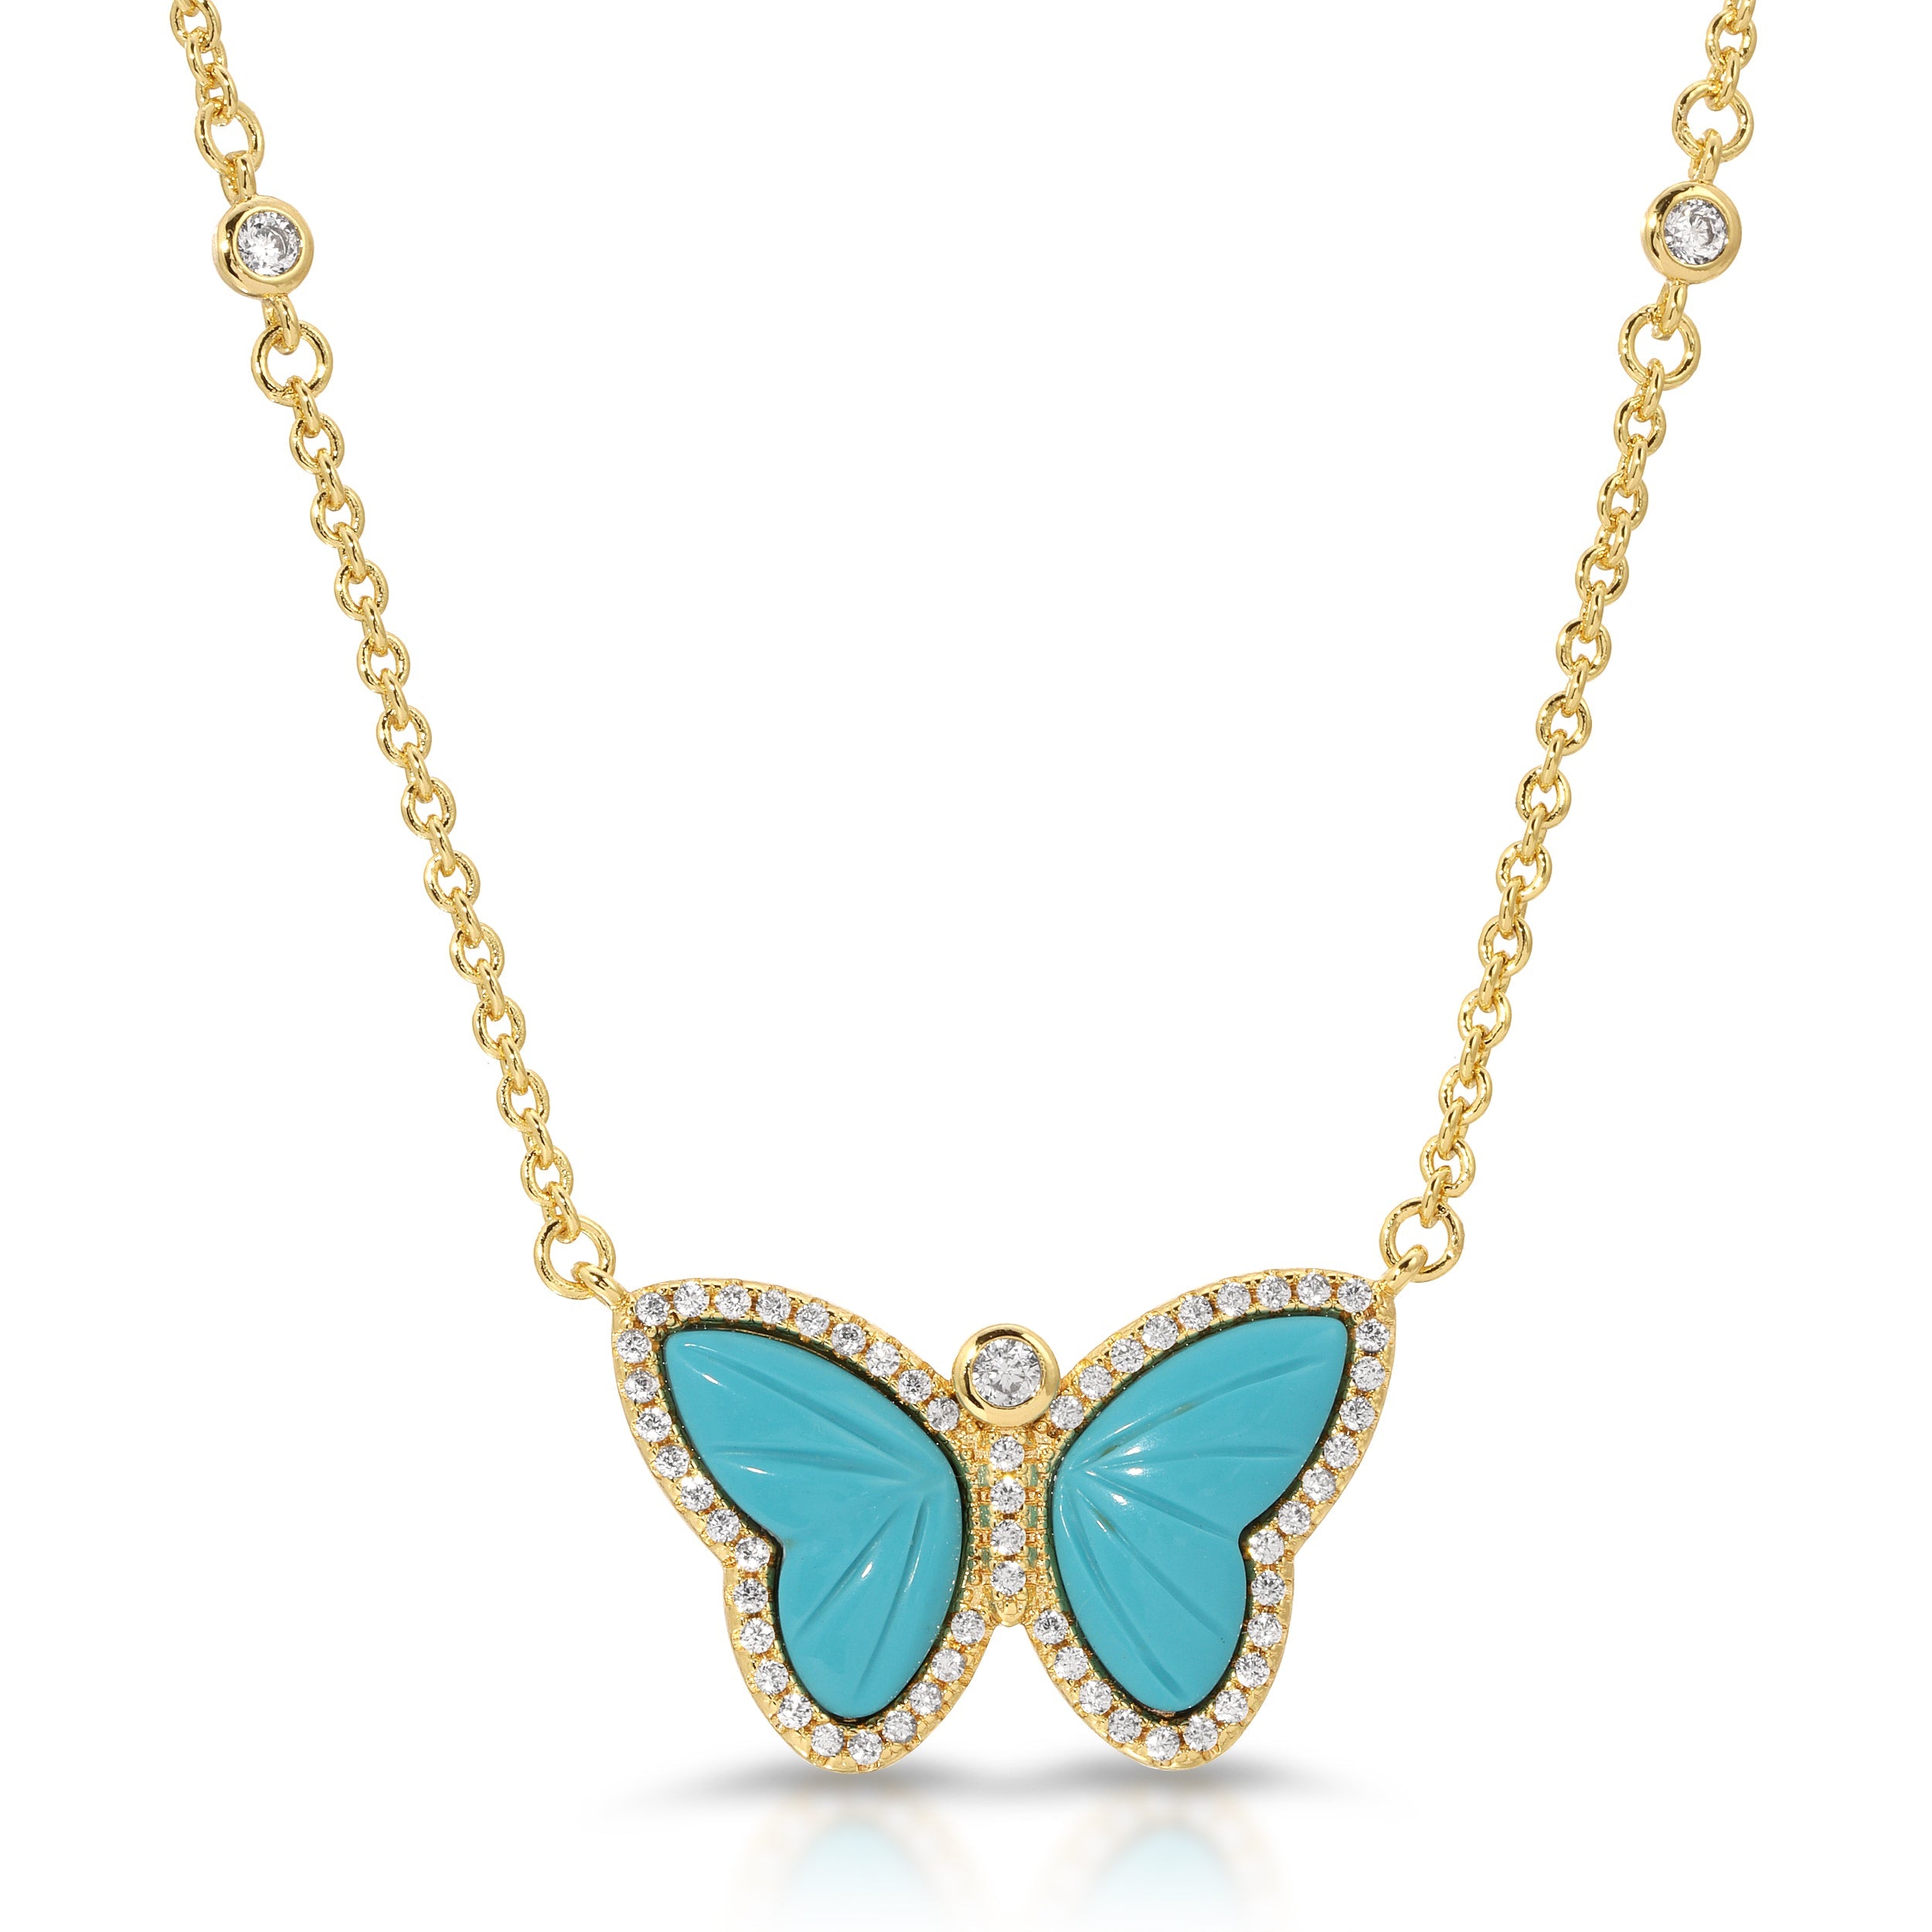 Allure butterfly Necklace- Turquoise